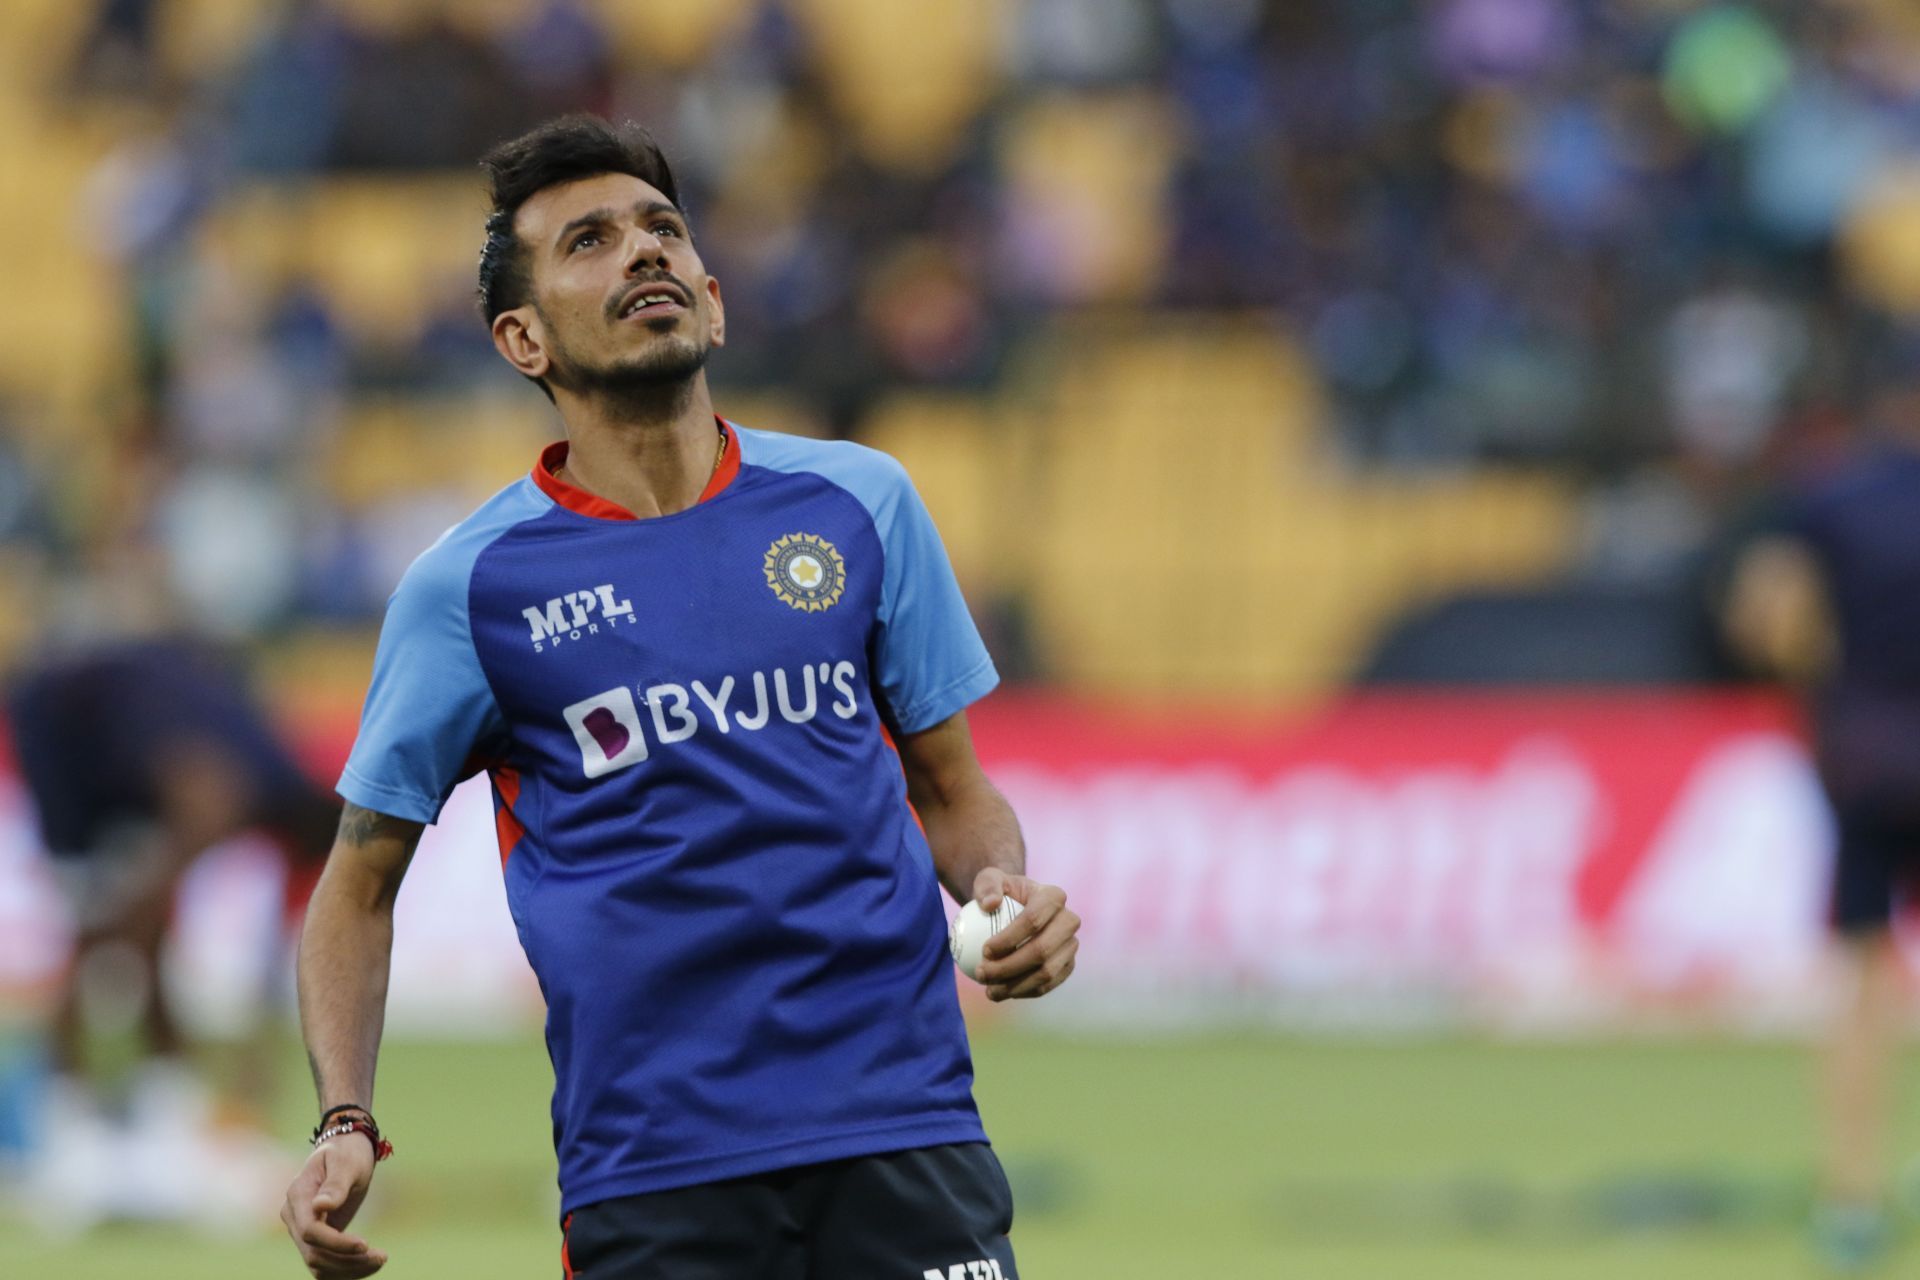 Chahal is sure to start as the frontline spinner in Asia Cup